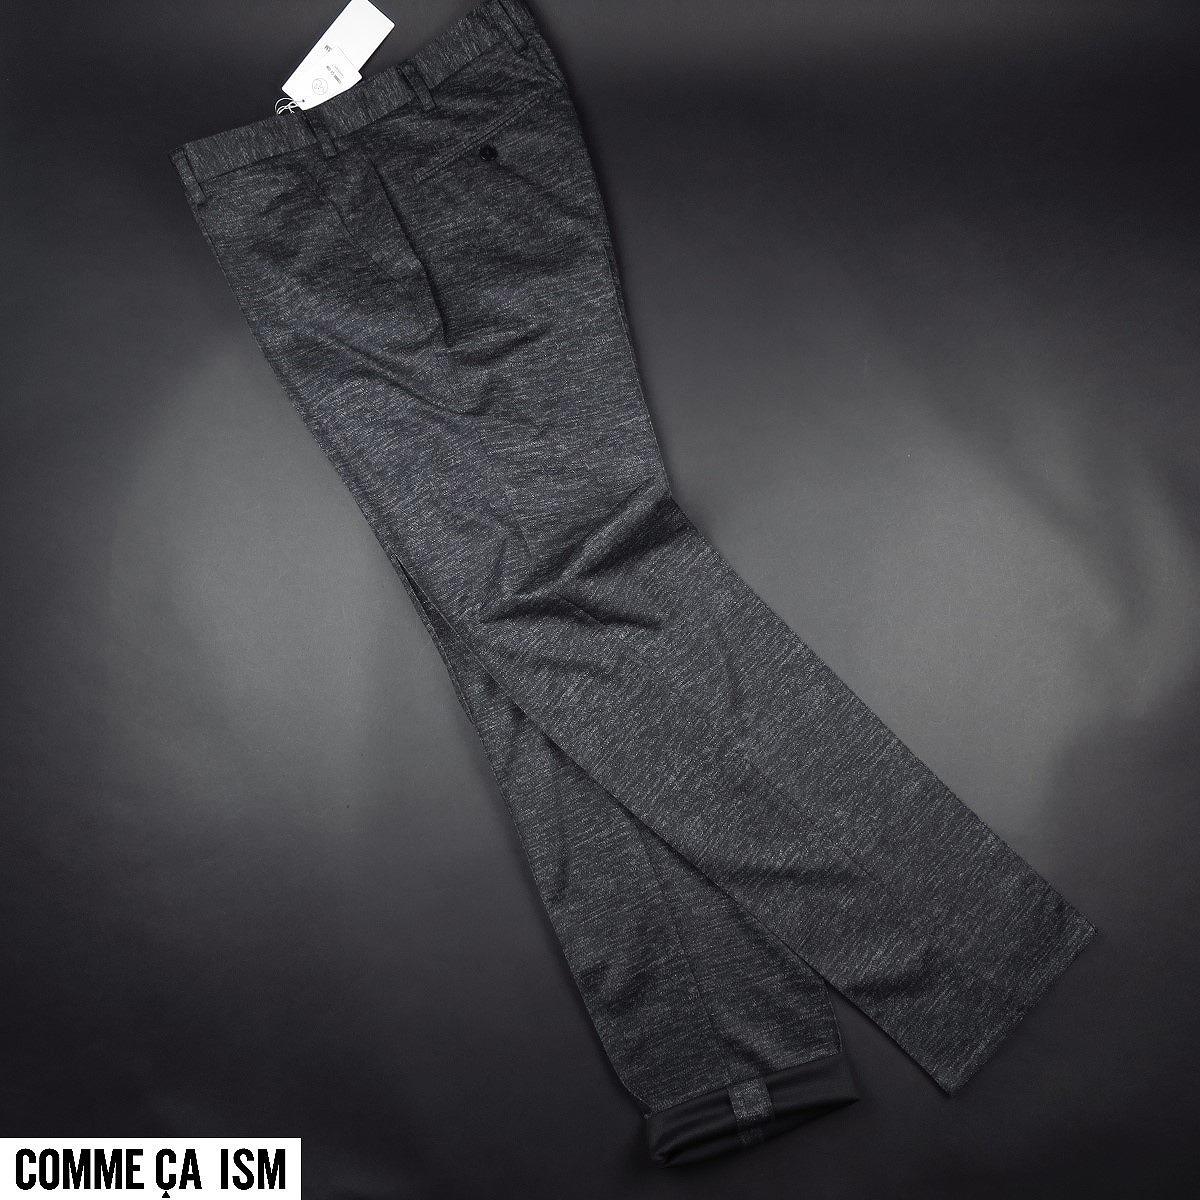  new goods *COMME CA ISM/ Comme Ca Ism / jersey material slim tapered slacks FW05/05 black /[L]